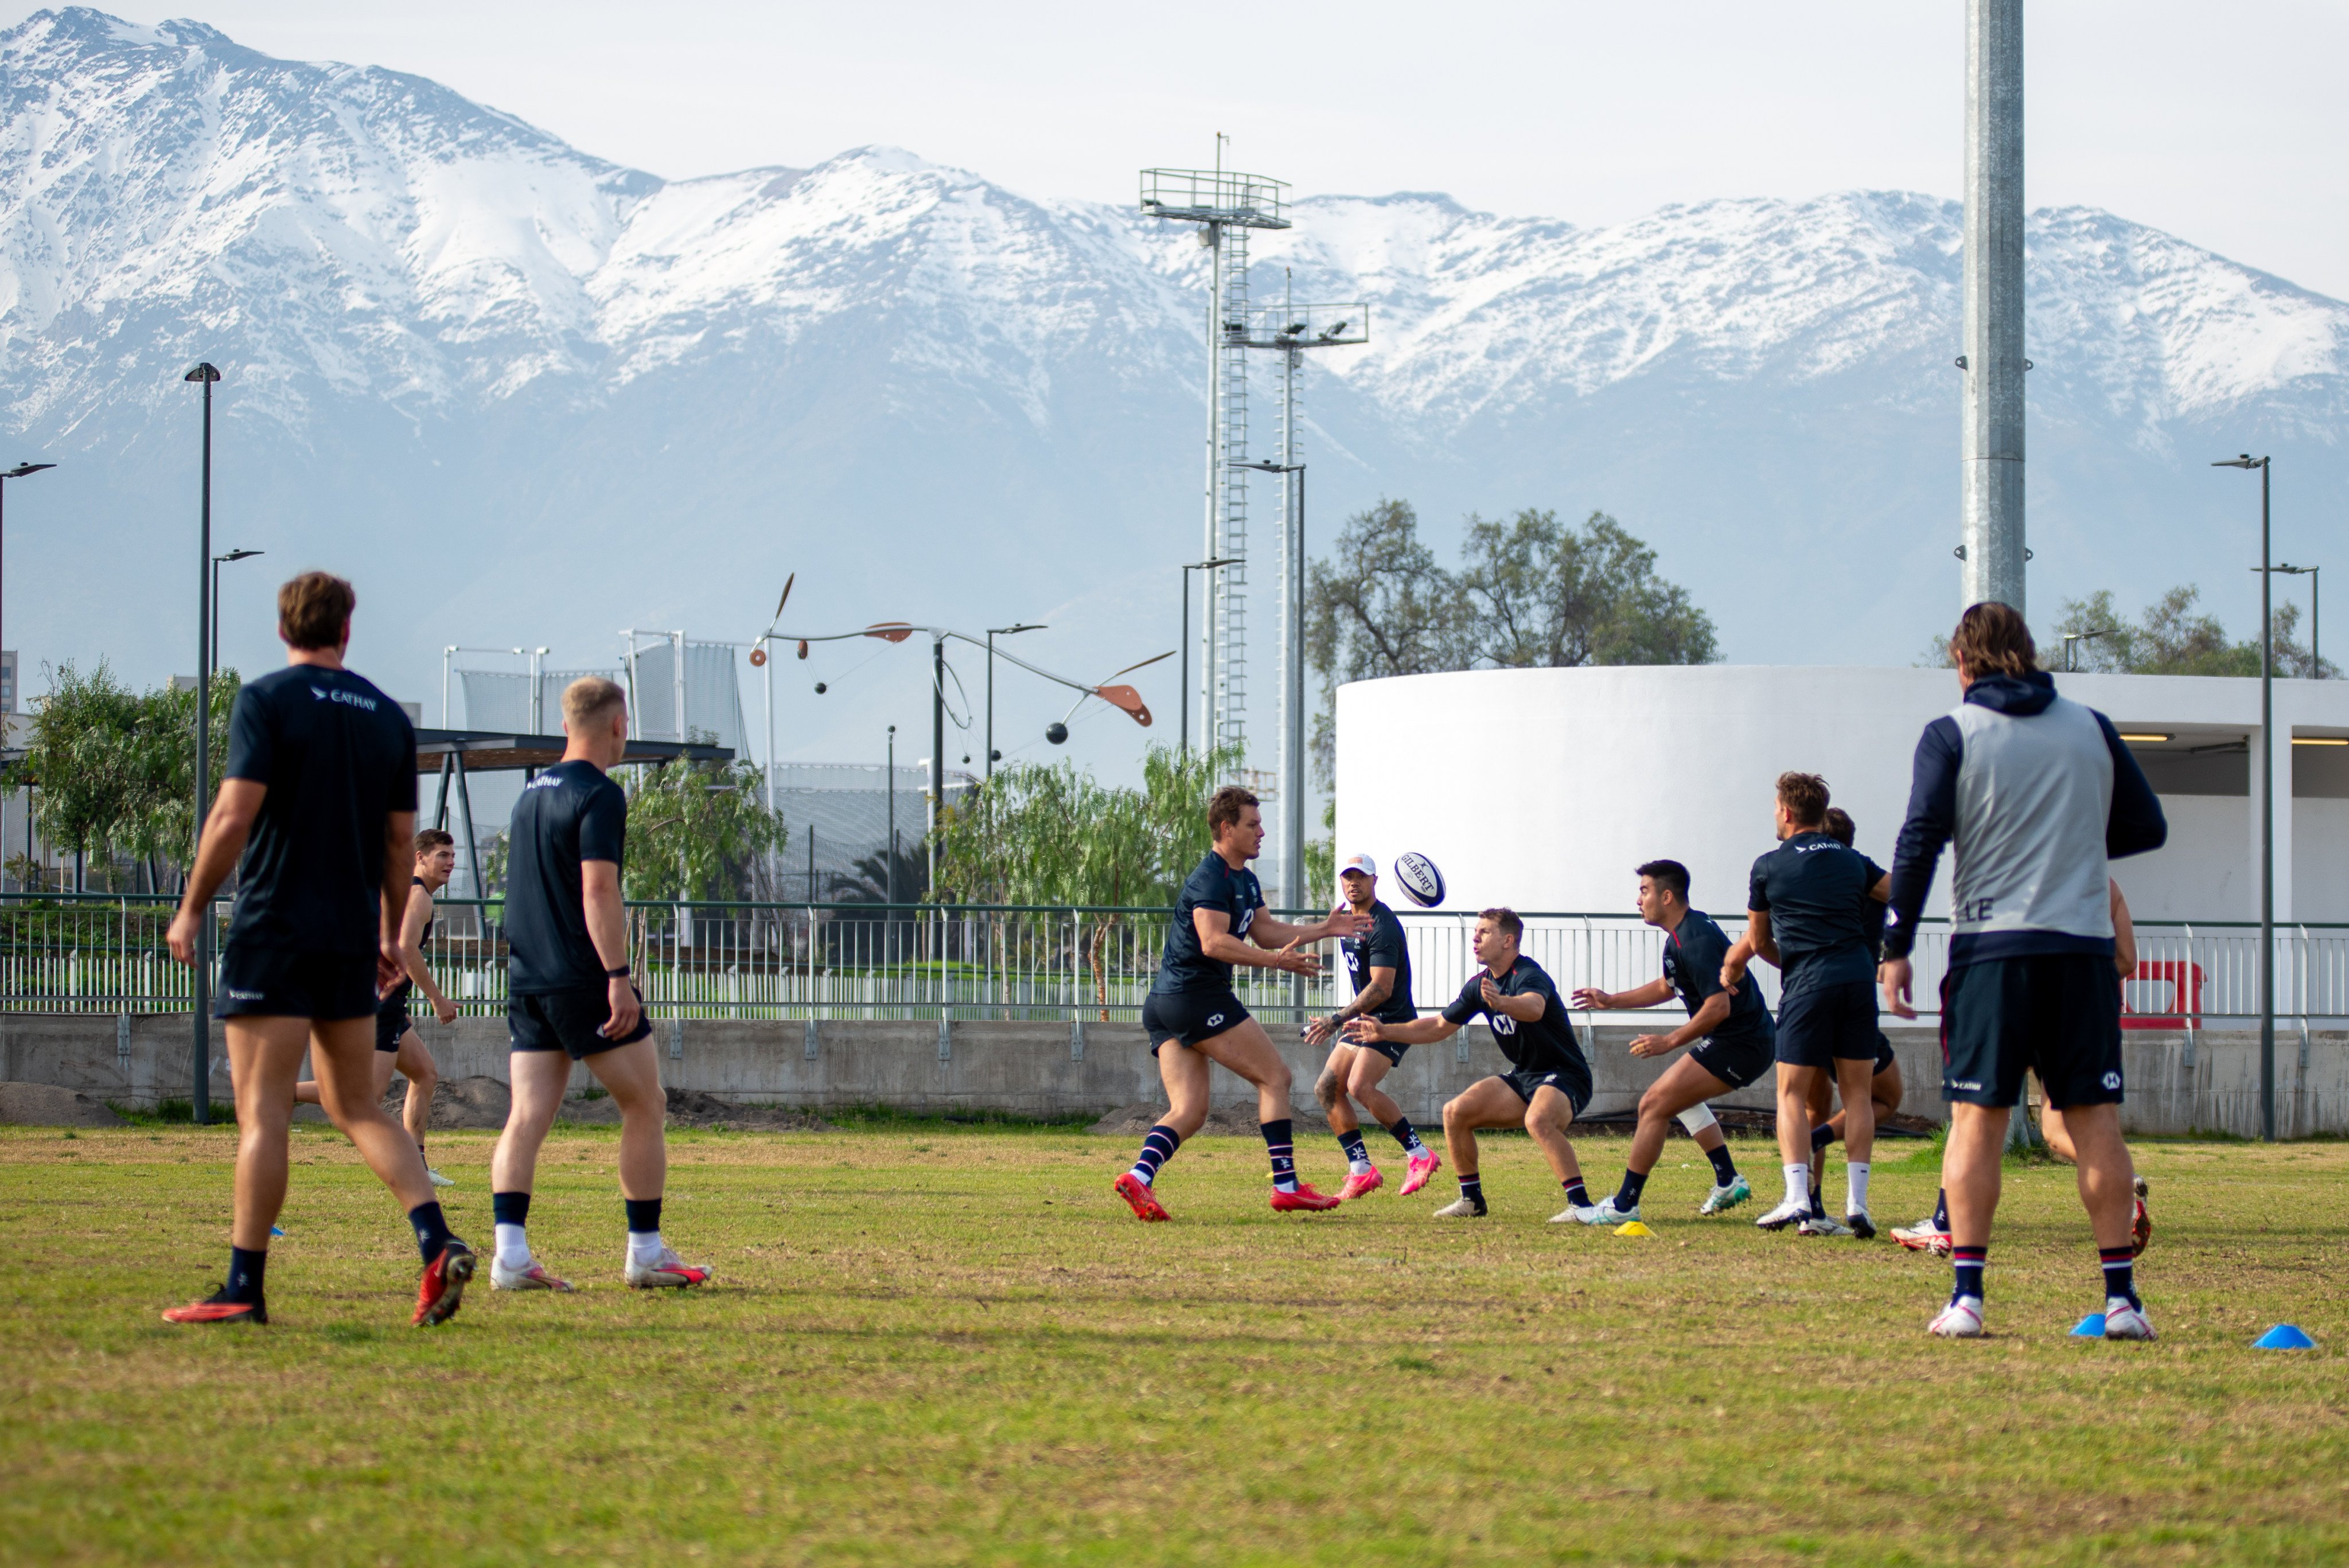 Hong Kong’s Tommy Hill (centre) passes the ball during a training session in Talca, Chile. Photo: Carlos Lorca/Chile Rugby